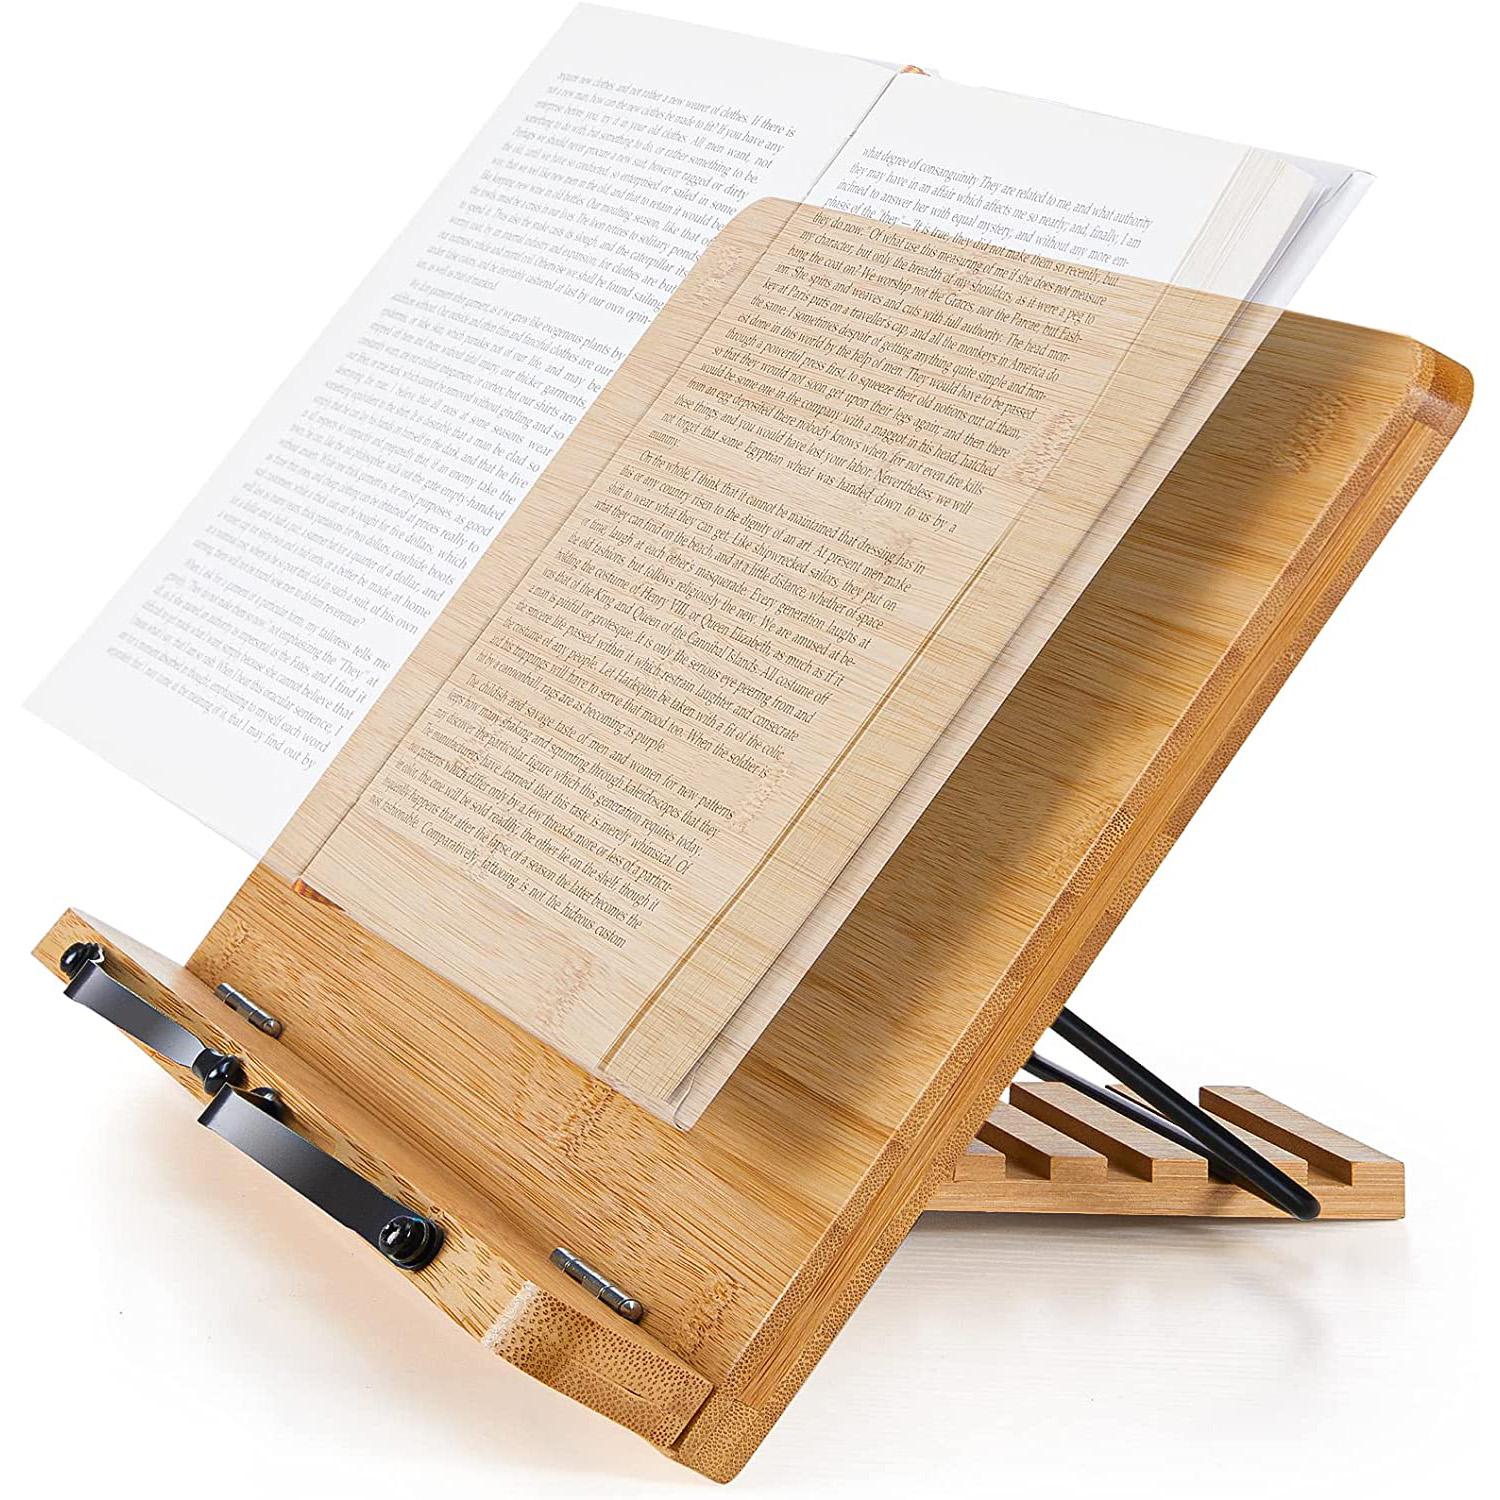 Bamboo Book or Tablet Stand for $9.99